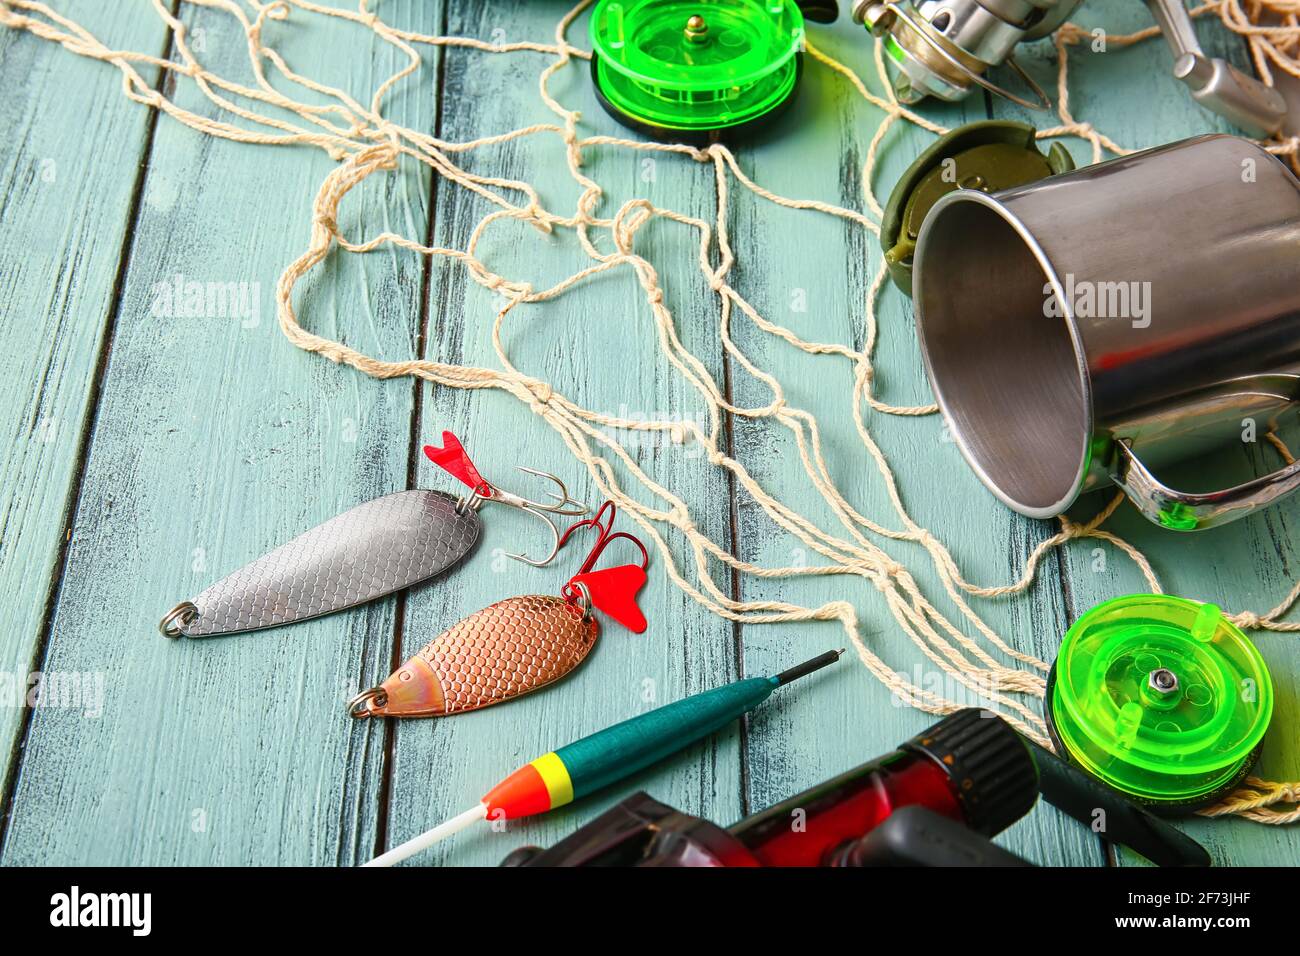 A Set of Items for Fishing, Bait with a Hook, a Reel with a Fishing Line  and a Fishing Rod, on a Light Background Stock Photo - Image of freshwater,  accessories: 175010410